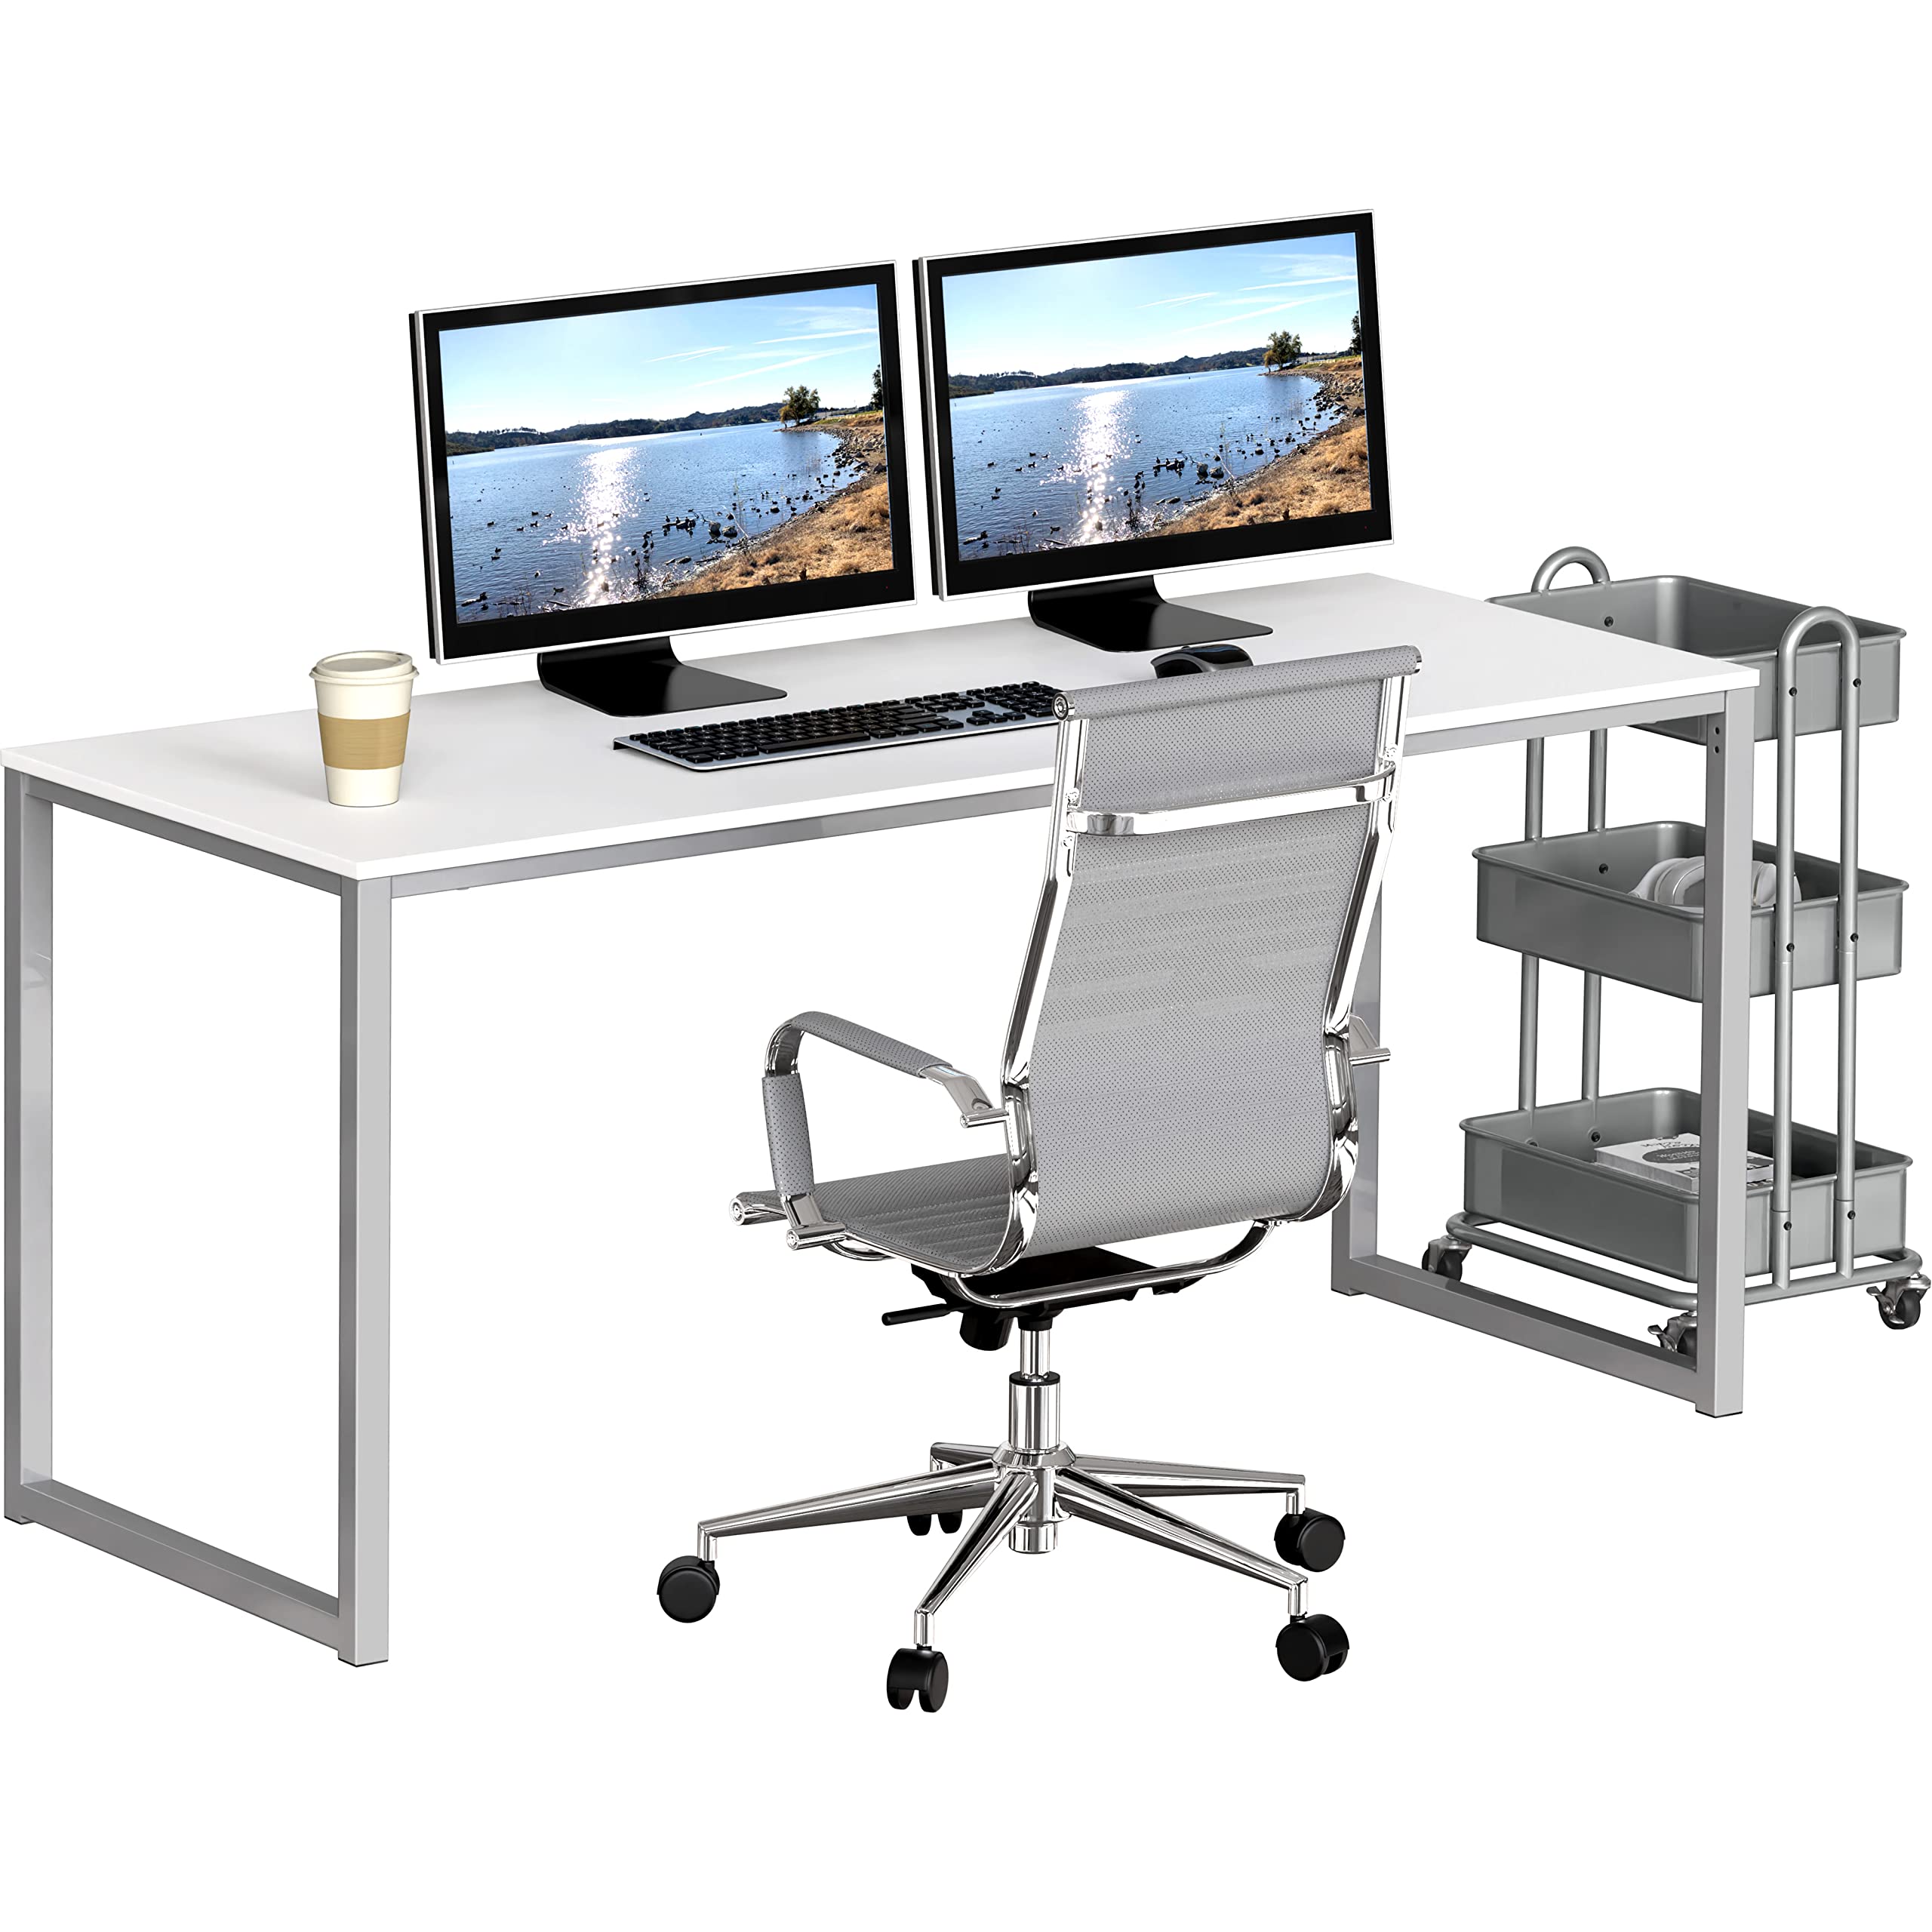 SHW Mission 55-Inch Home Office Solo Computer Desk, White - image 4 of 5